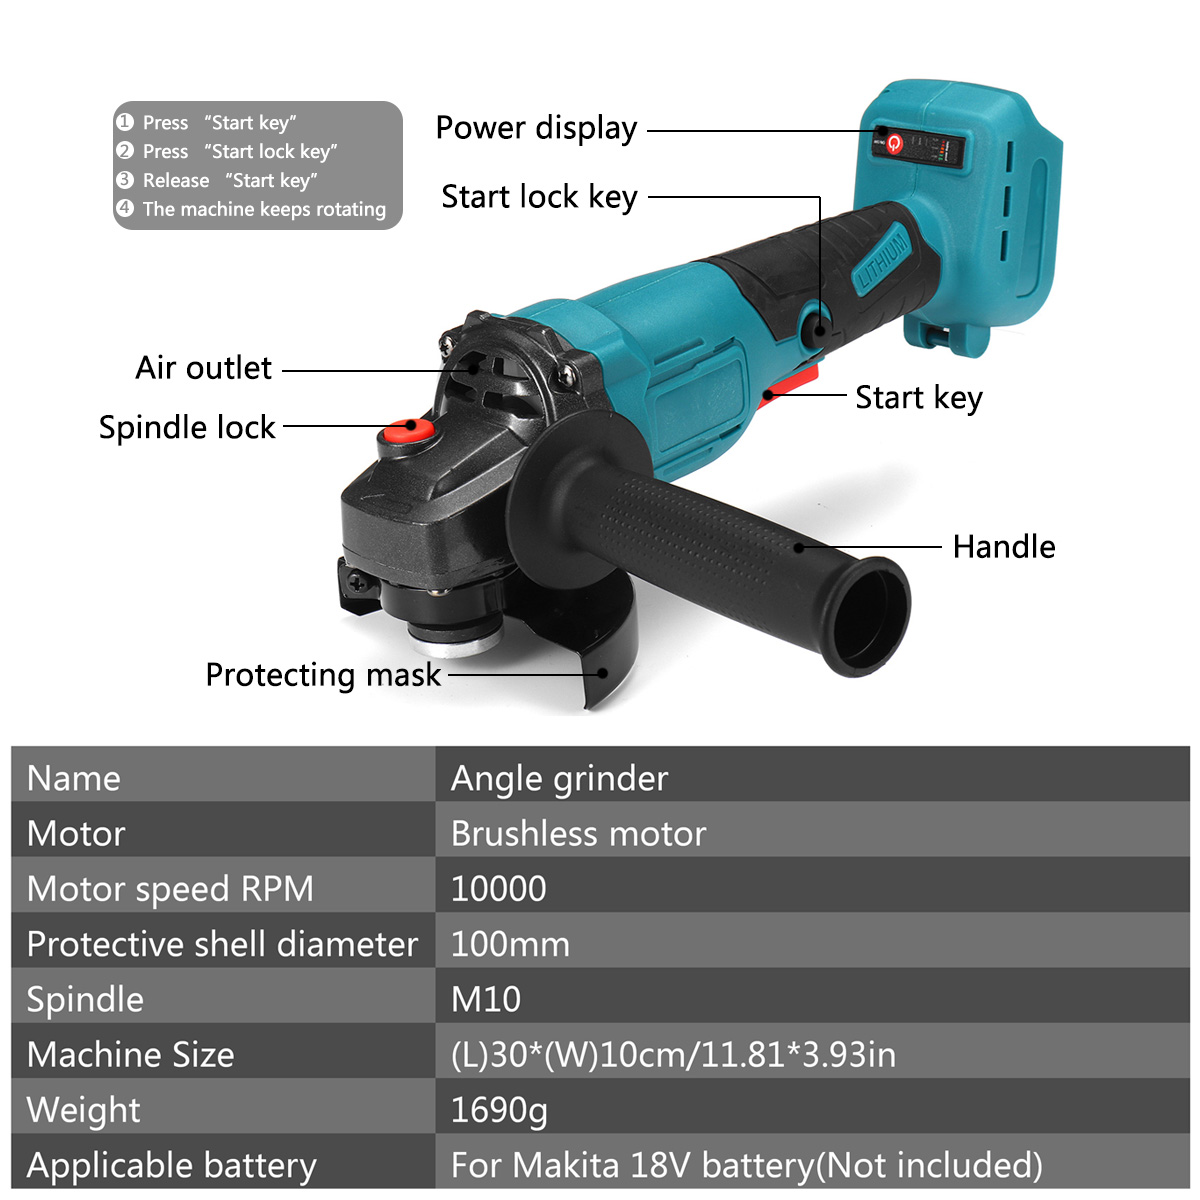 FASGet-800W-100mm-Electric-Angle-Grinder-Cordless-Brushless-Polishing-Machuine-Cut-Off-Tool-For-Maki-1740114-3